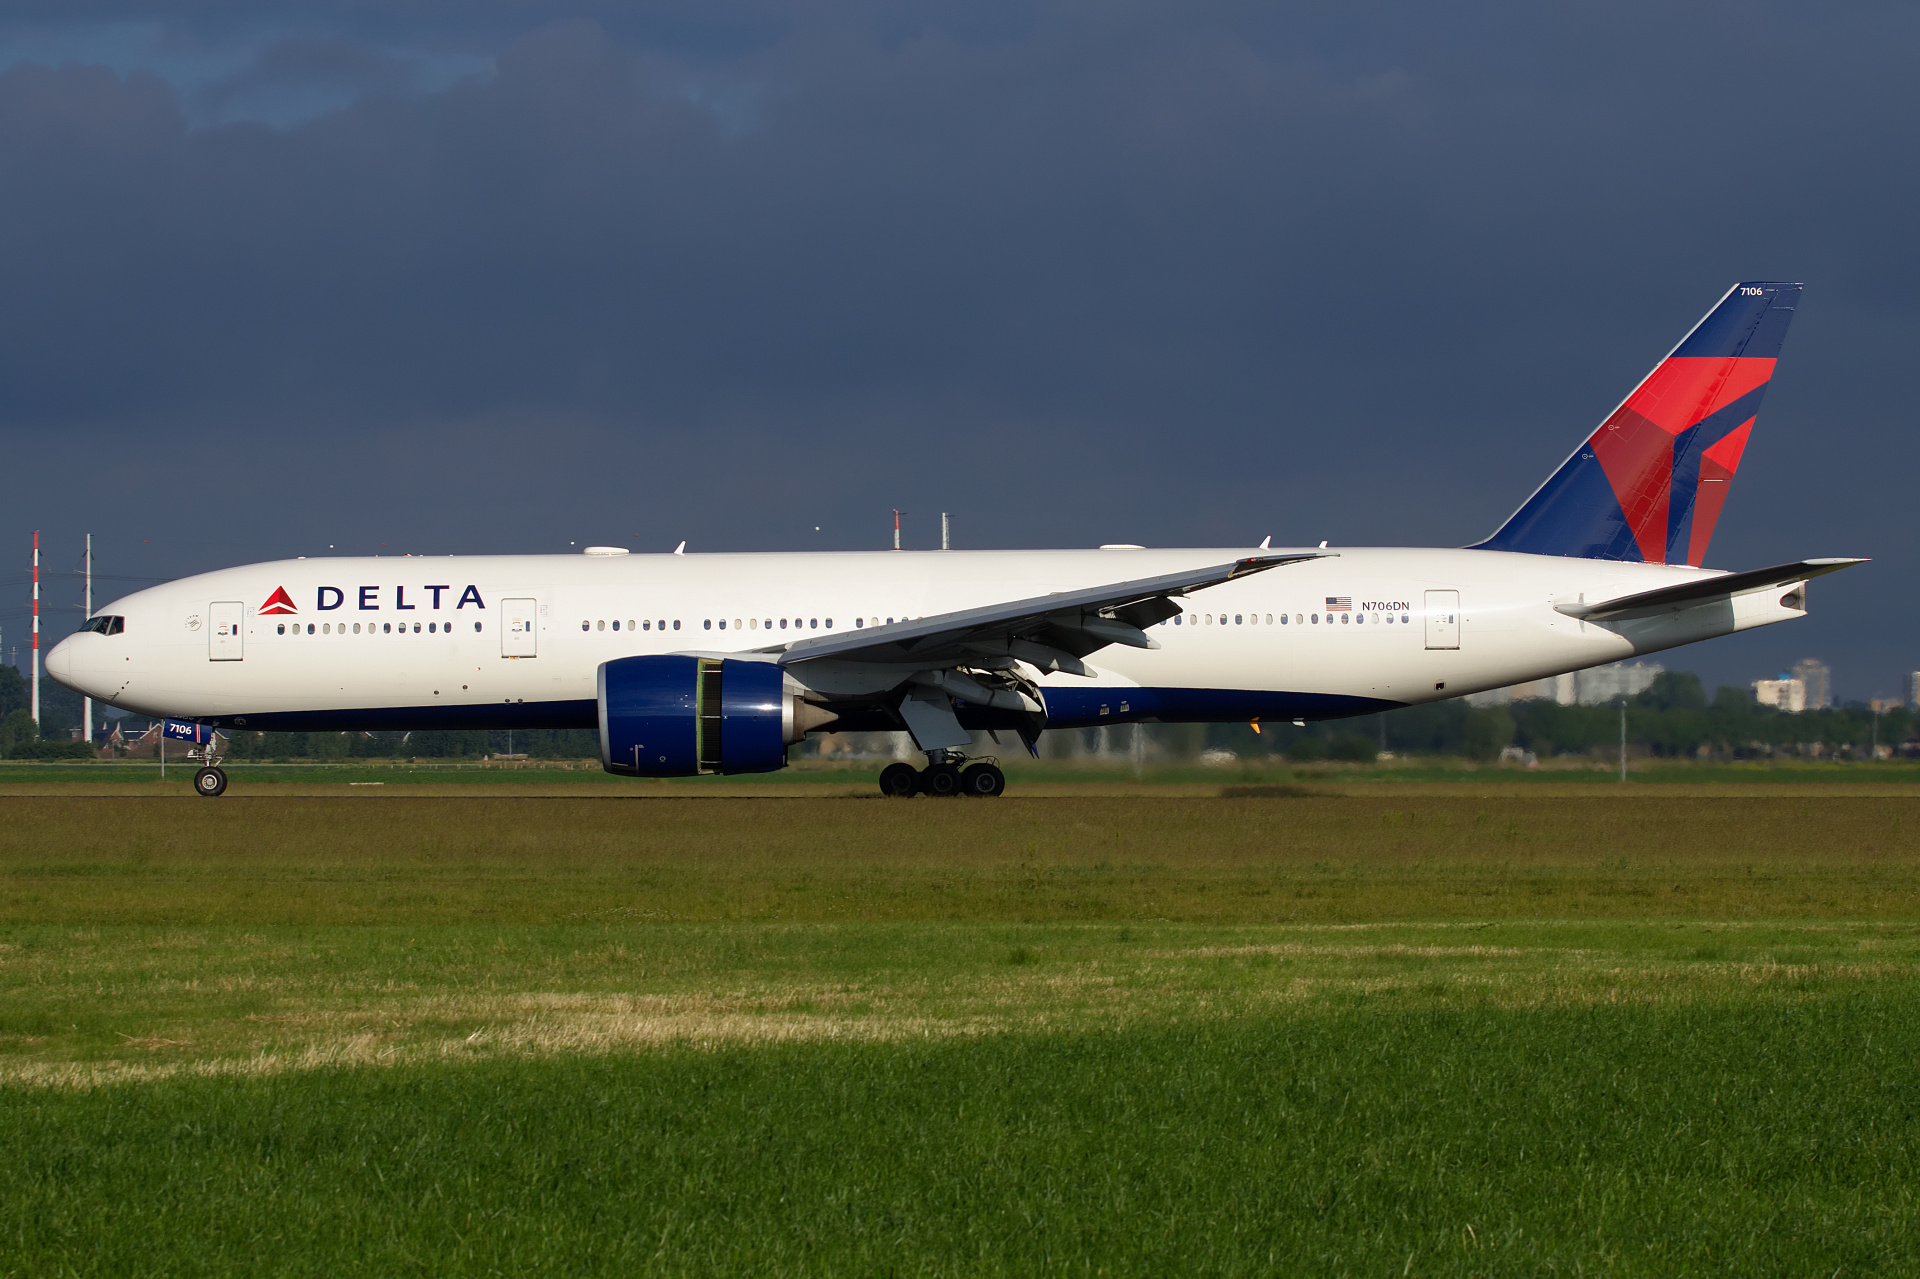 N706DN, Delta Airlines (Aircraft » Schiphol Spotting » Boeing 777-200LR)